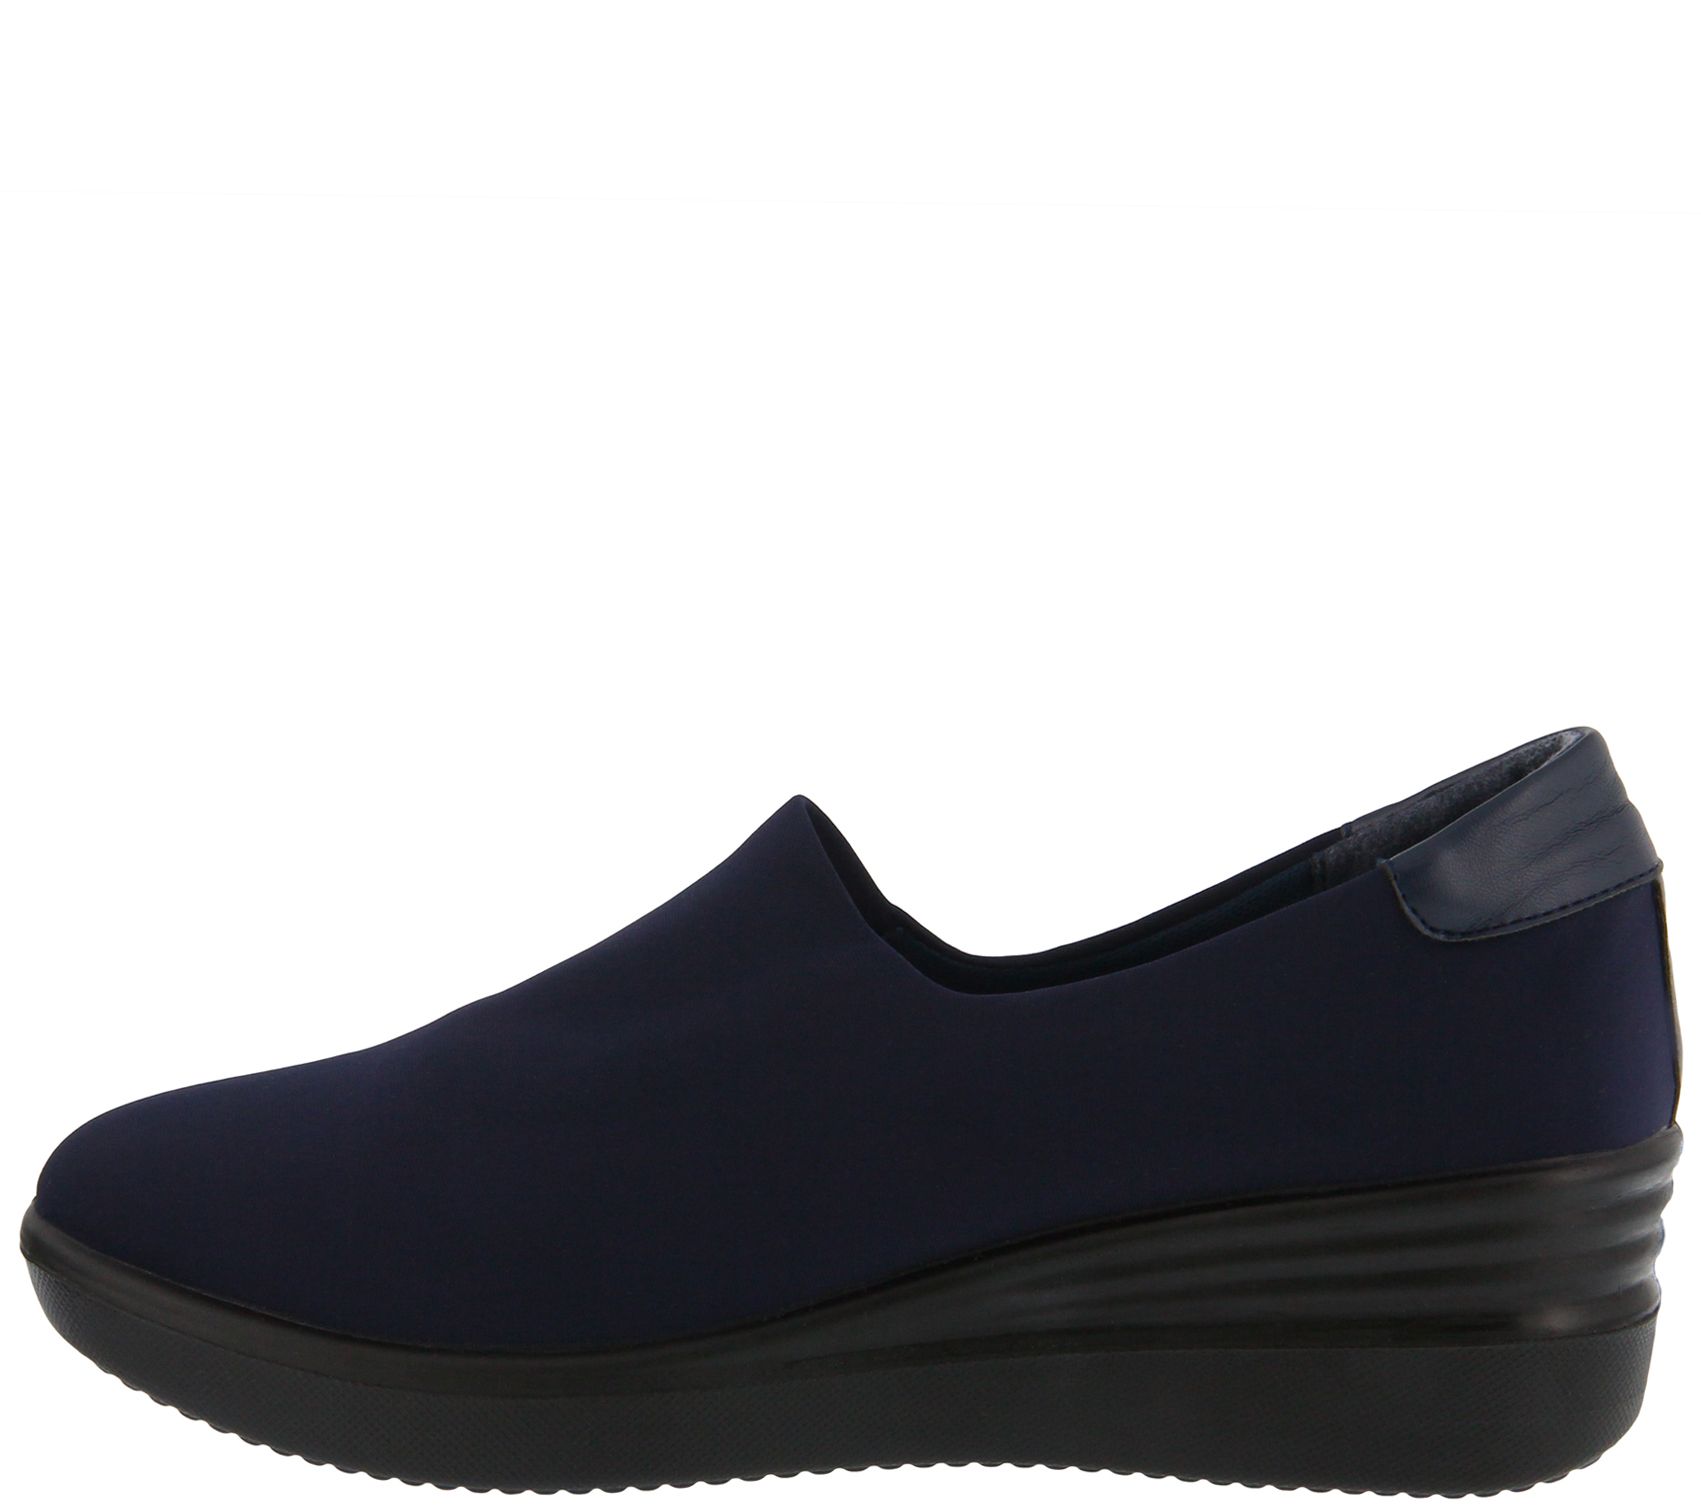 Flexus by Spring Step Lycra Slip-On Shoes - Noral - QVC.com